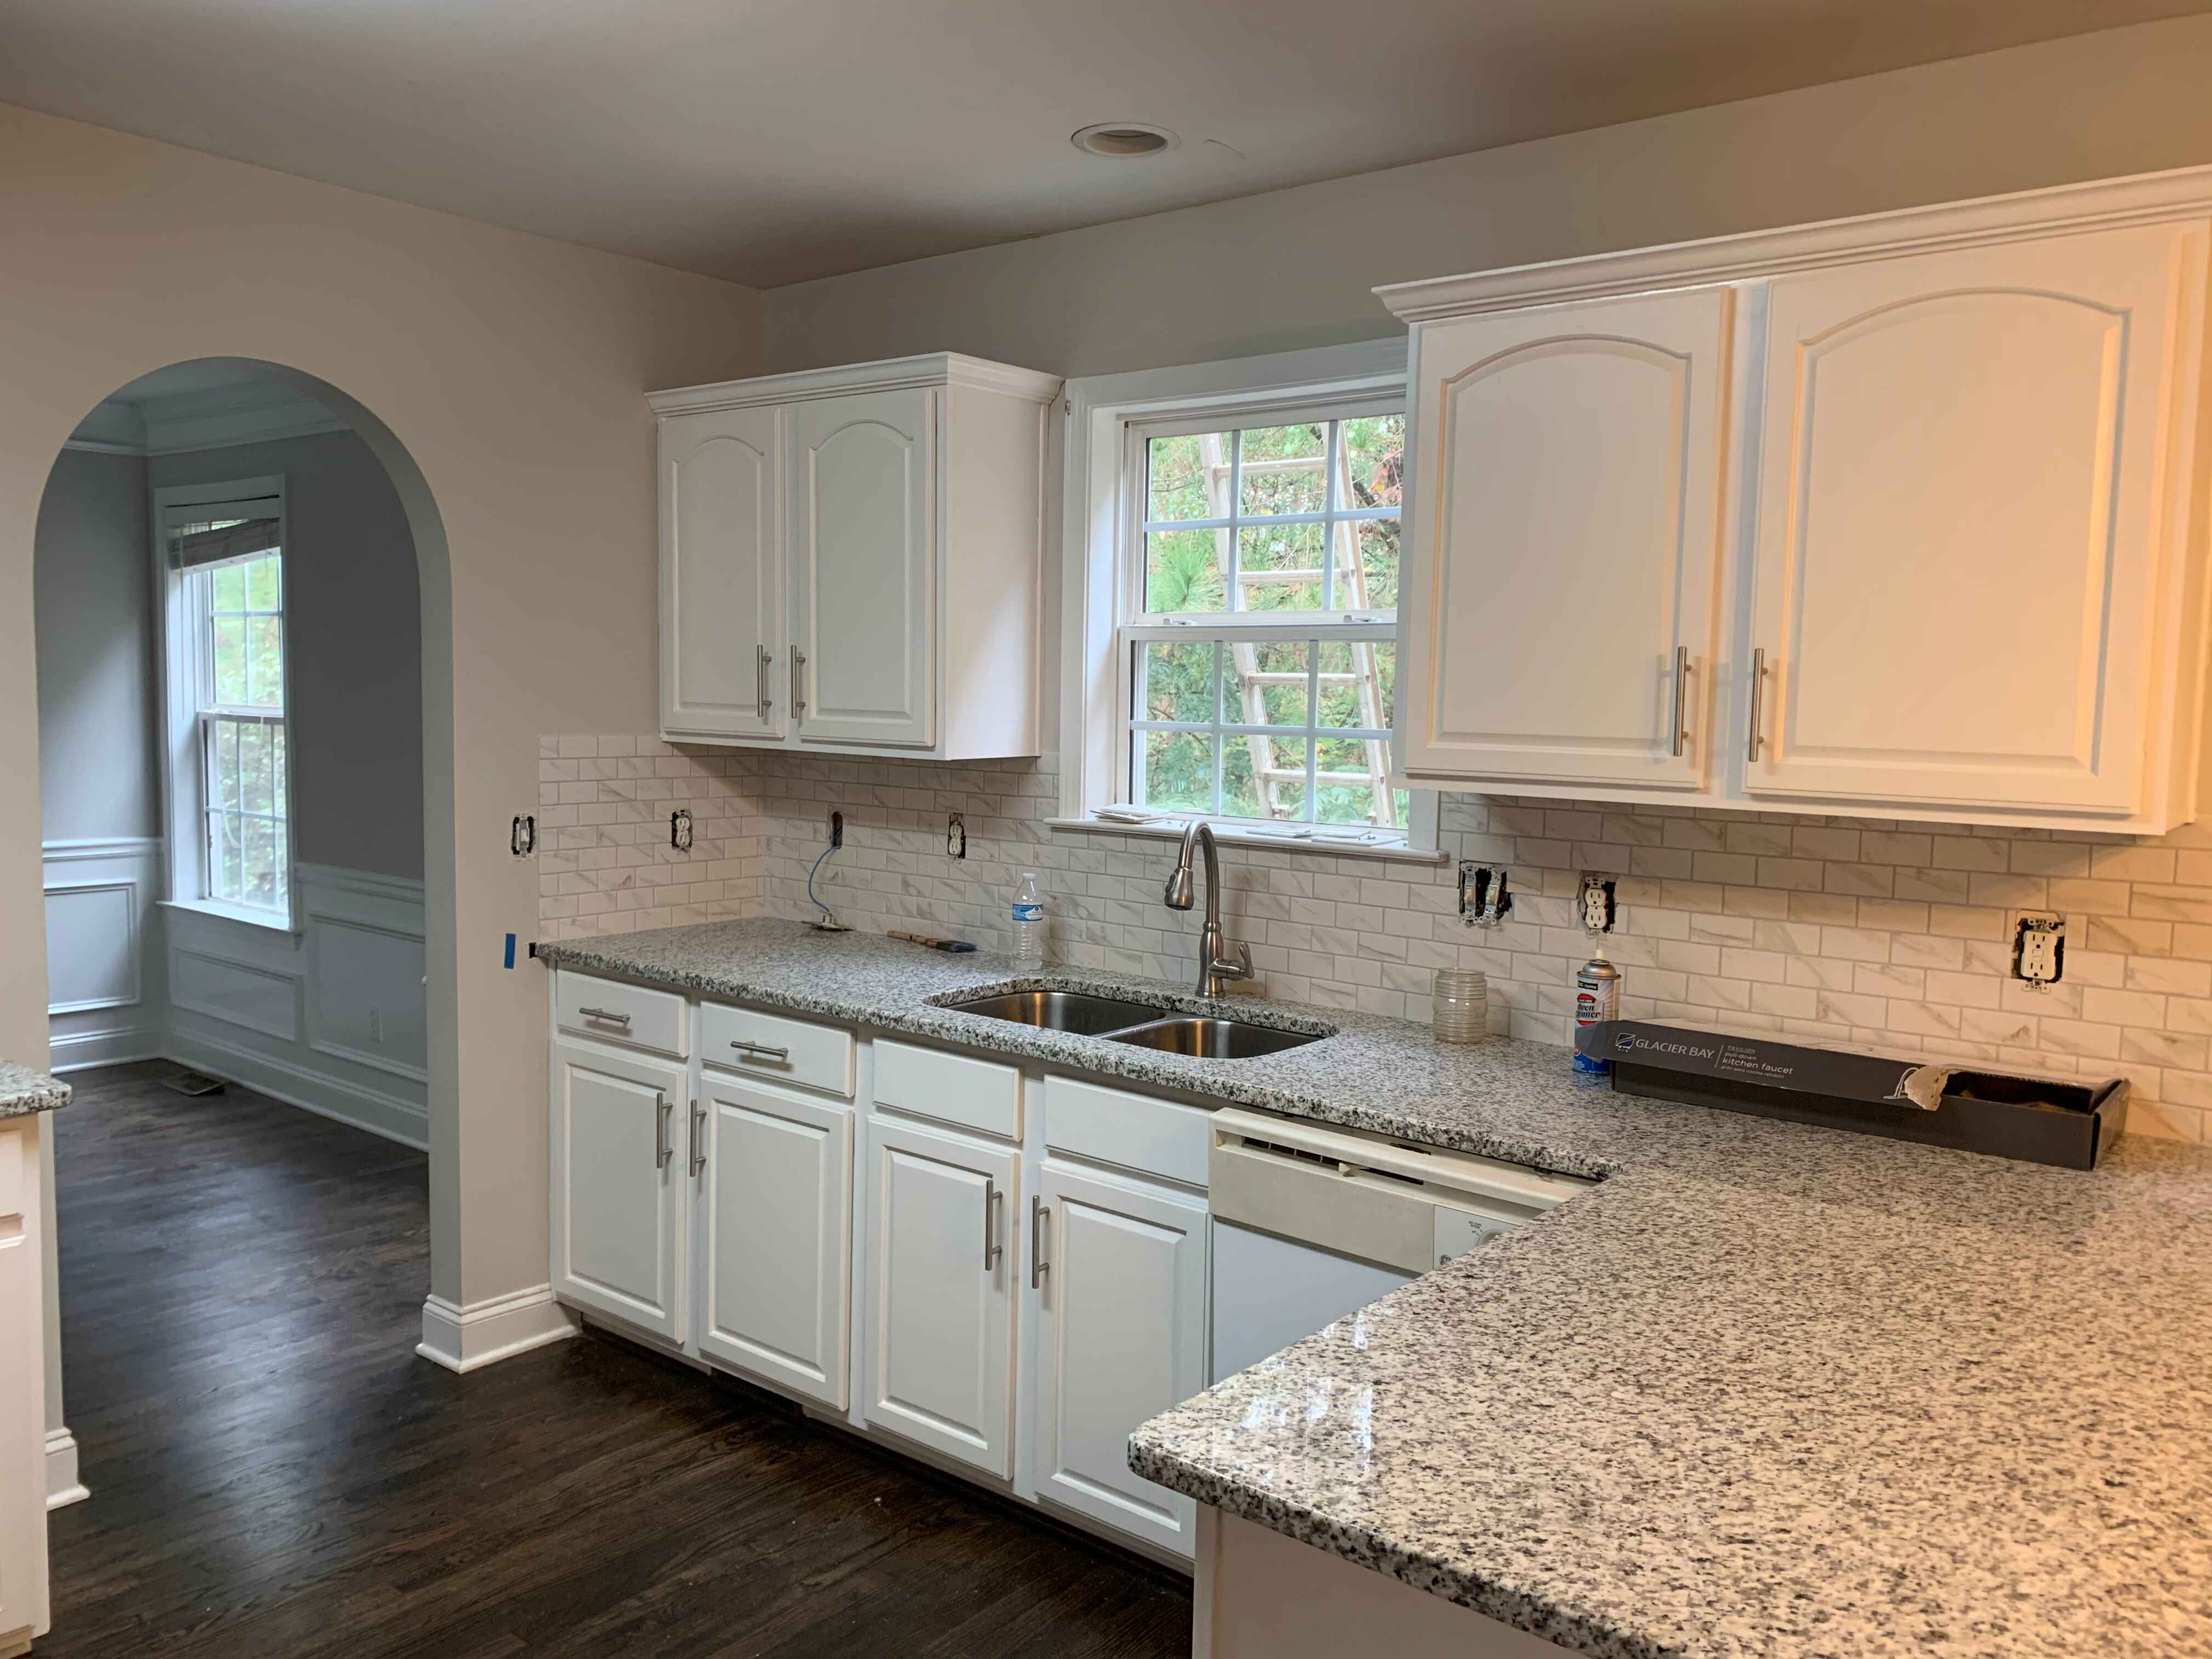 Beautifully Refinished Cabinets A Fresh Start for Your Kitchen